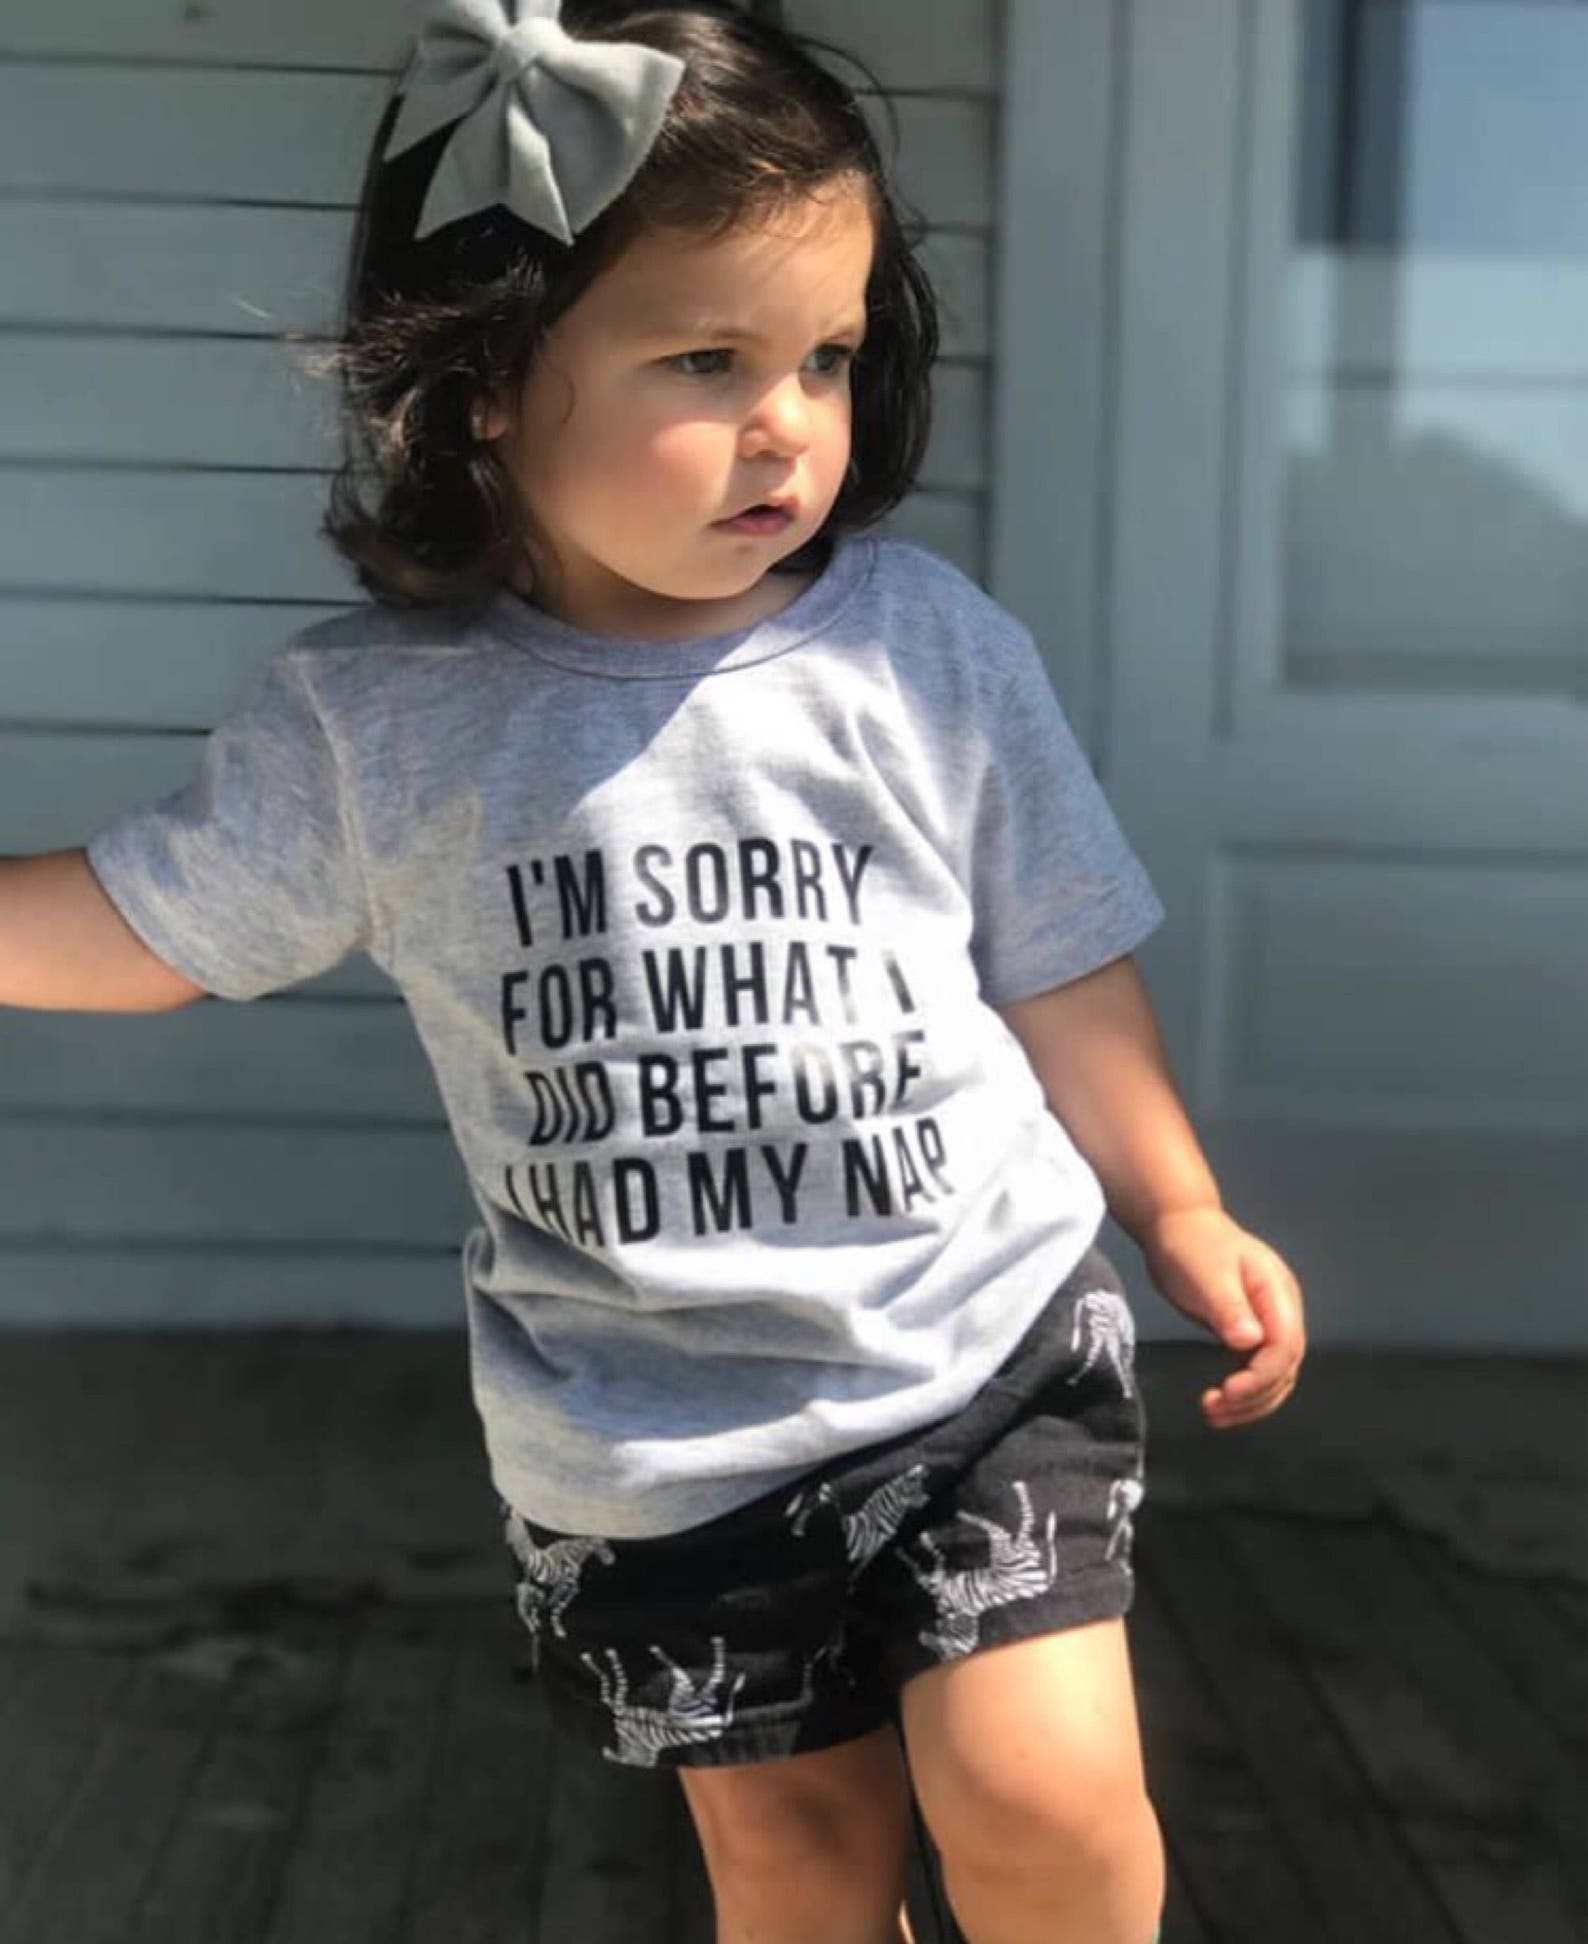 I'm Sorry for What I Did Before I Had My Nap // Nap Shirt - Etsy